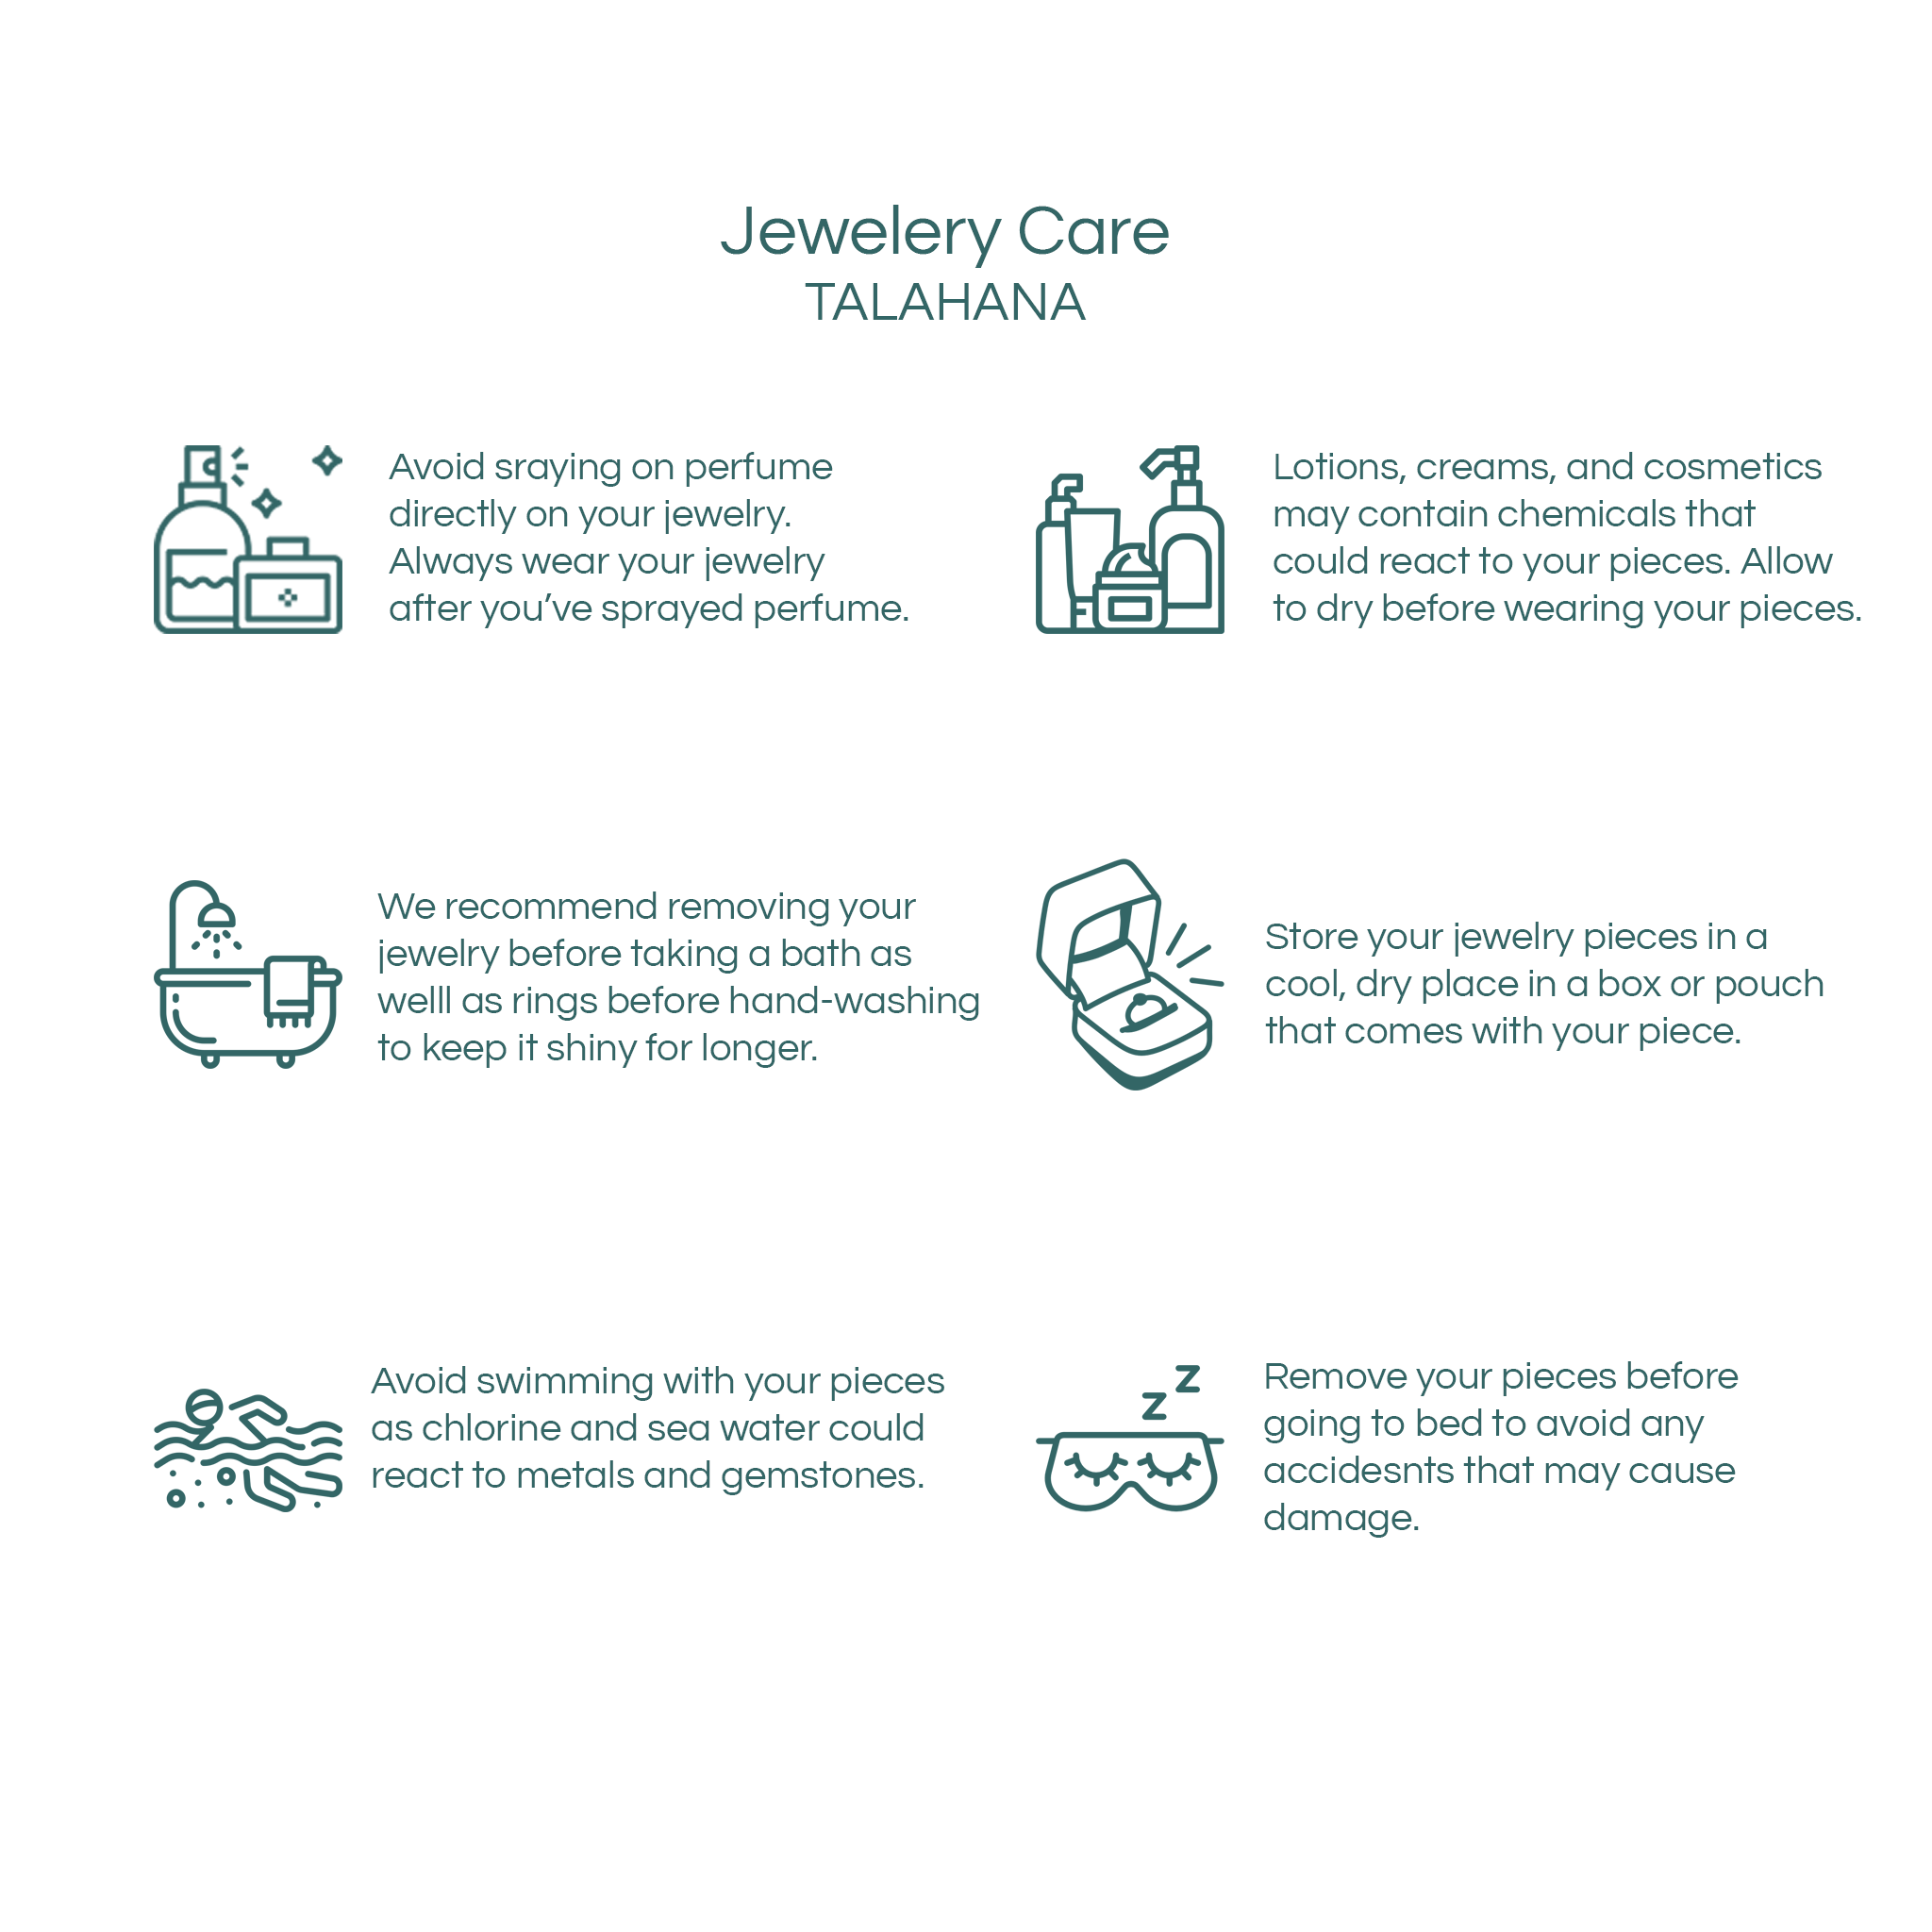 Jewelry Care: How to Clean, Wear & Store Jewelry